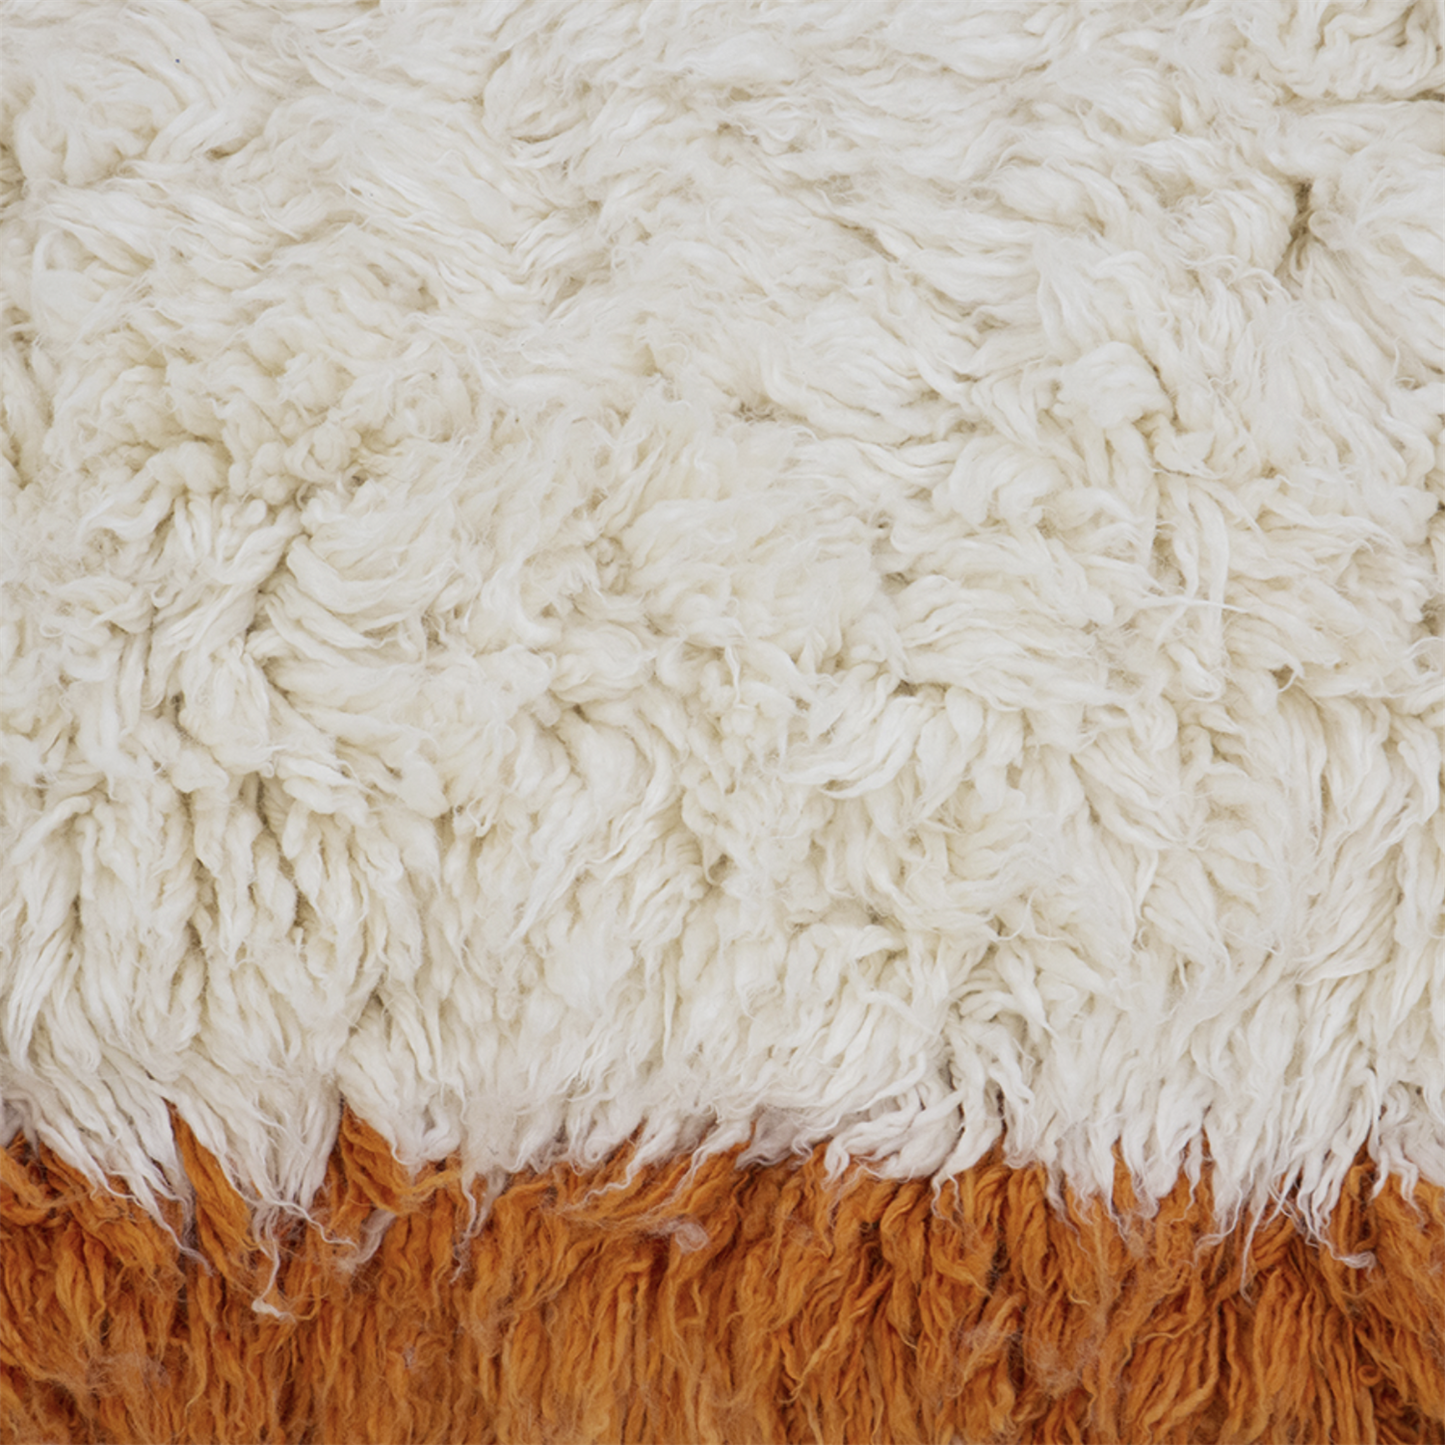 Fluffy Square Rug 'Retro Summers' 250 x 250